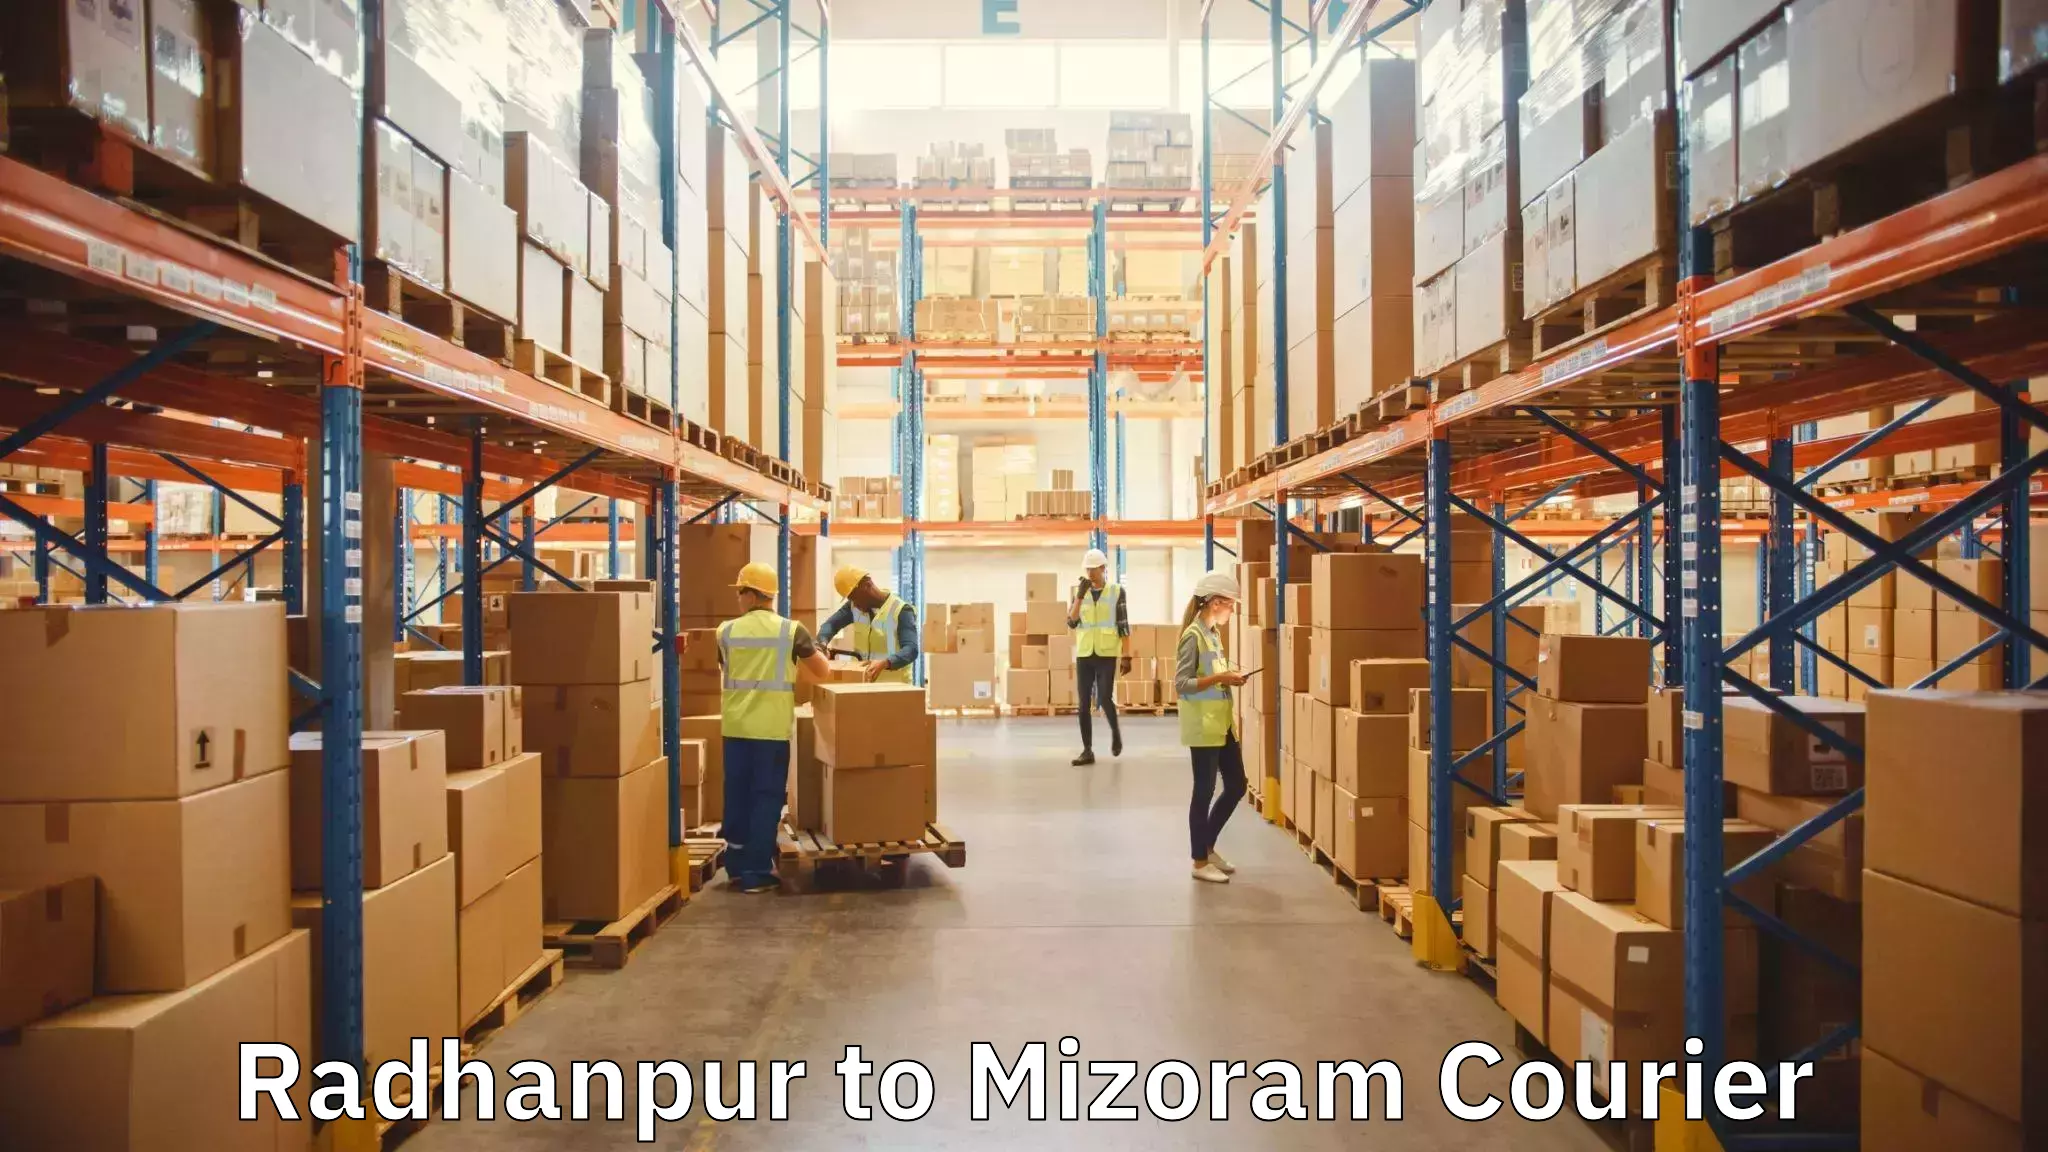 Professional moving assistance Radhanpur to Mizoram